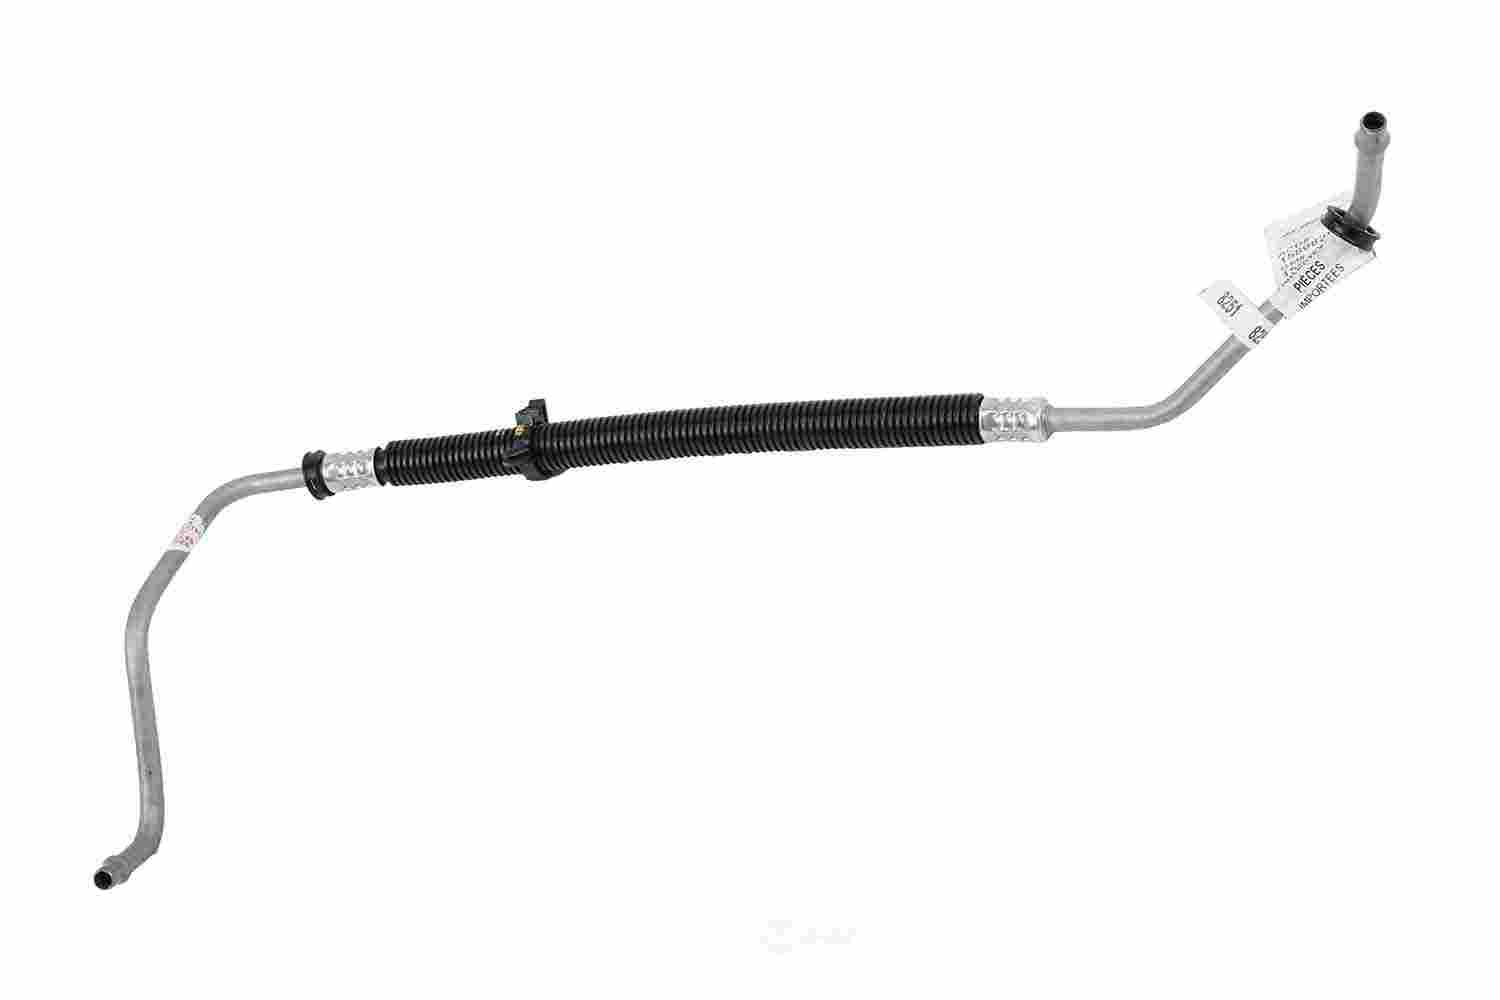 GM GENUINE PARTS - Automatic Transmission Oil Cooler Tube - GMP 15808251